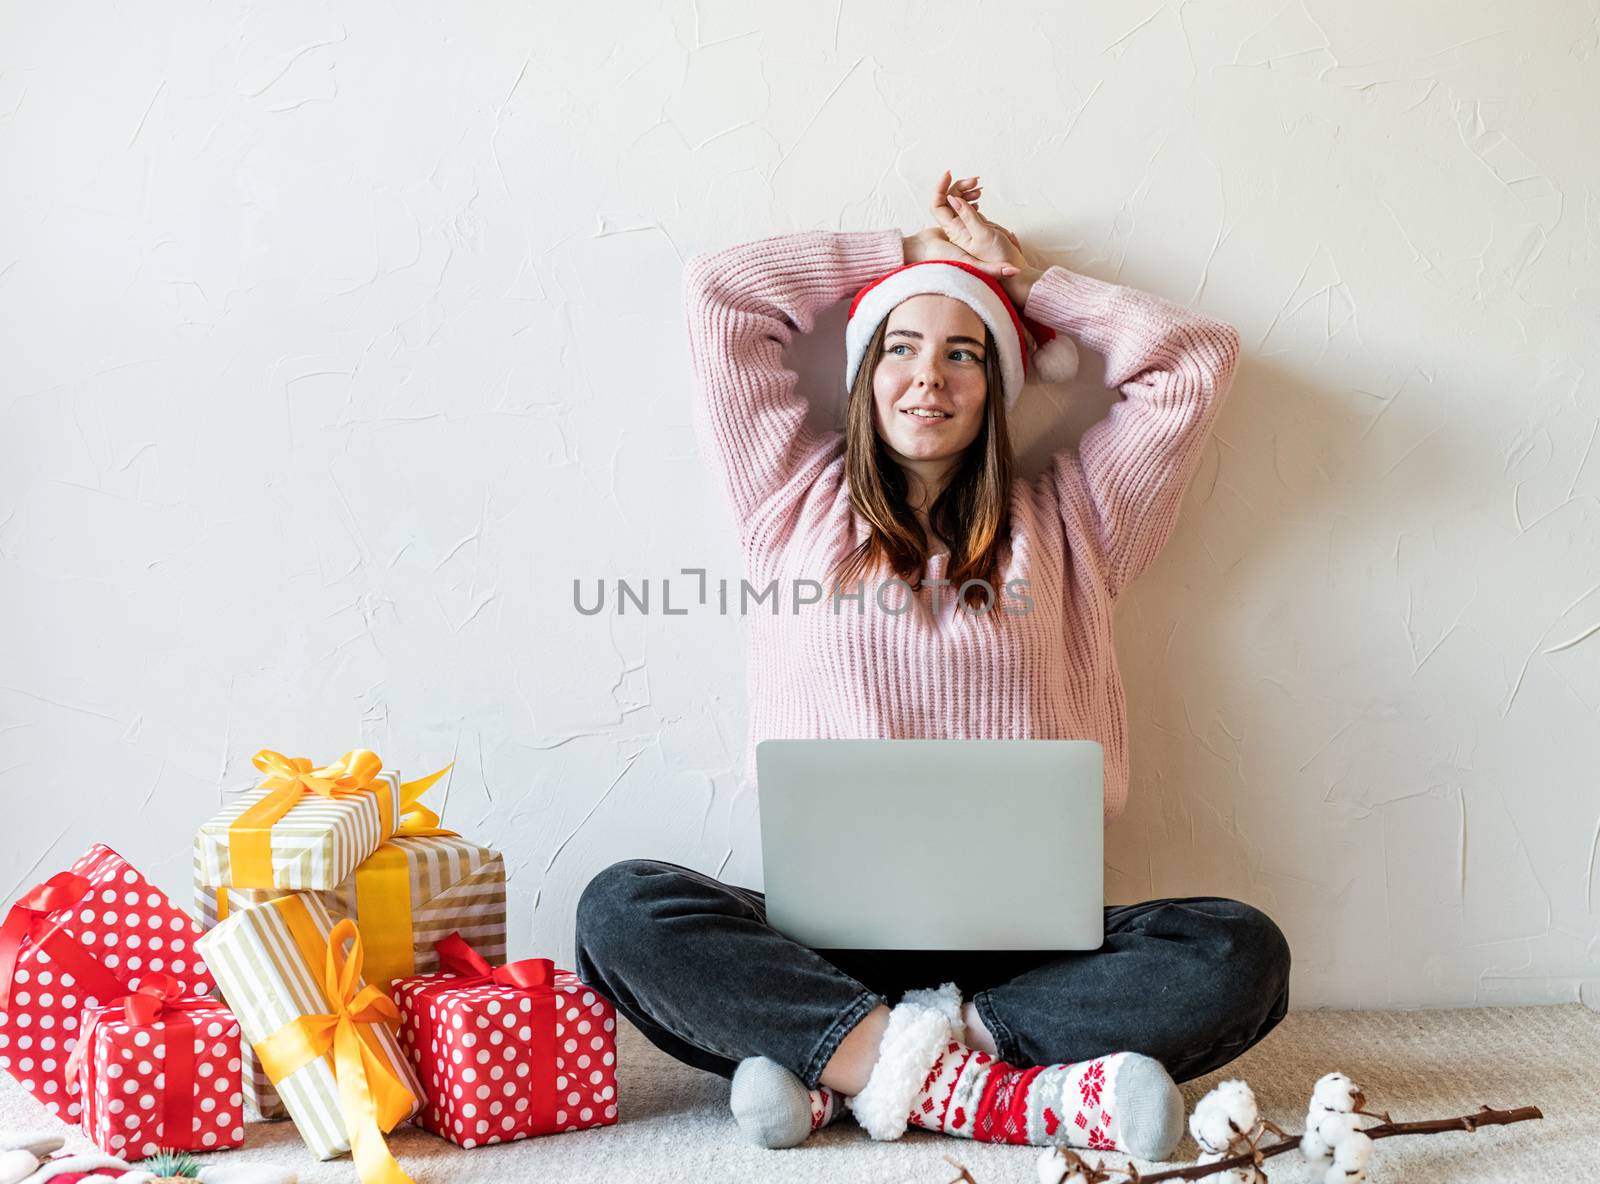 Christmas planing, online shopping concept. Young woman in santa hat shopping online surrounded by presents